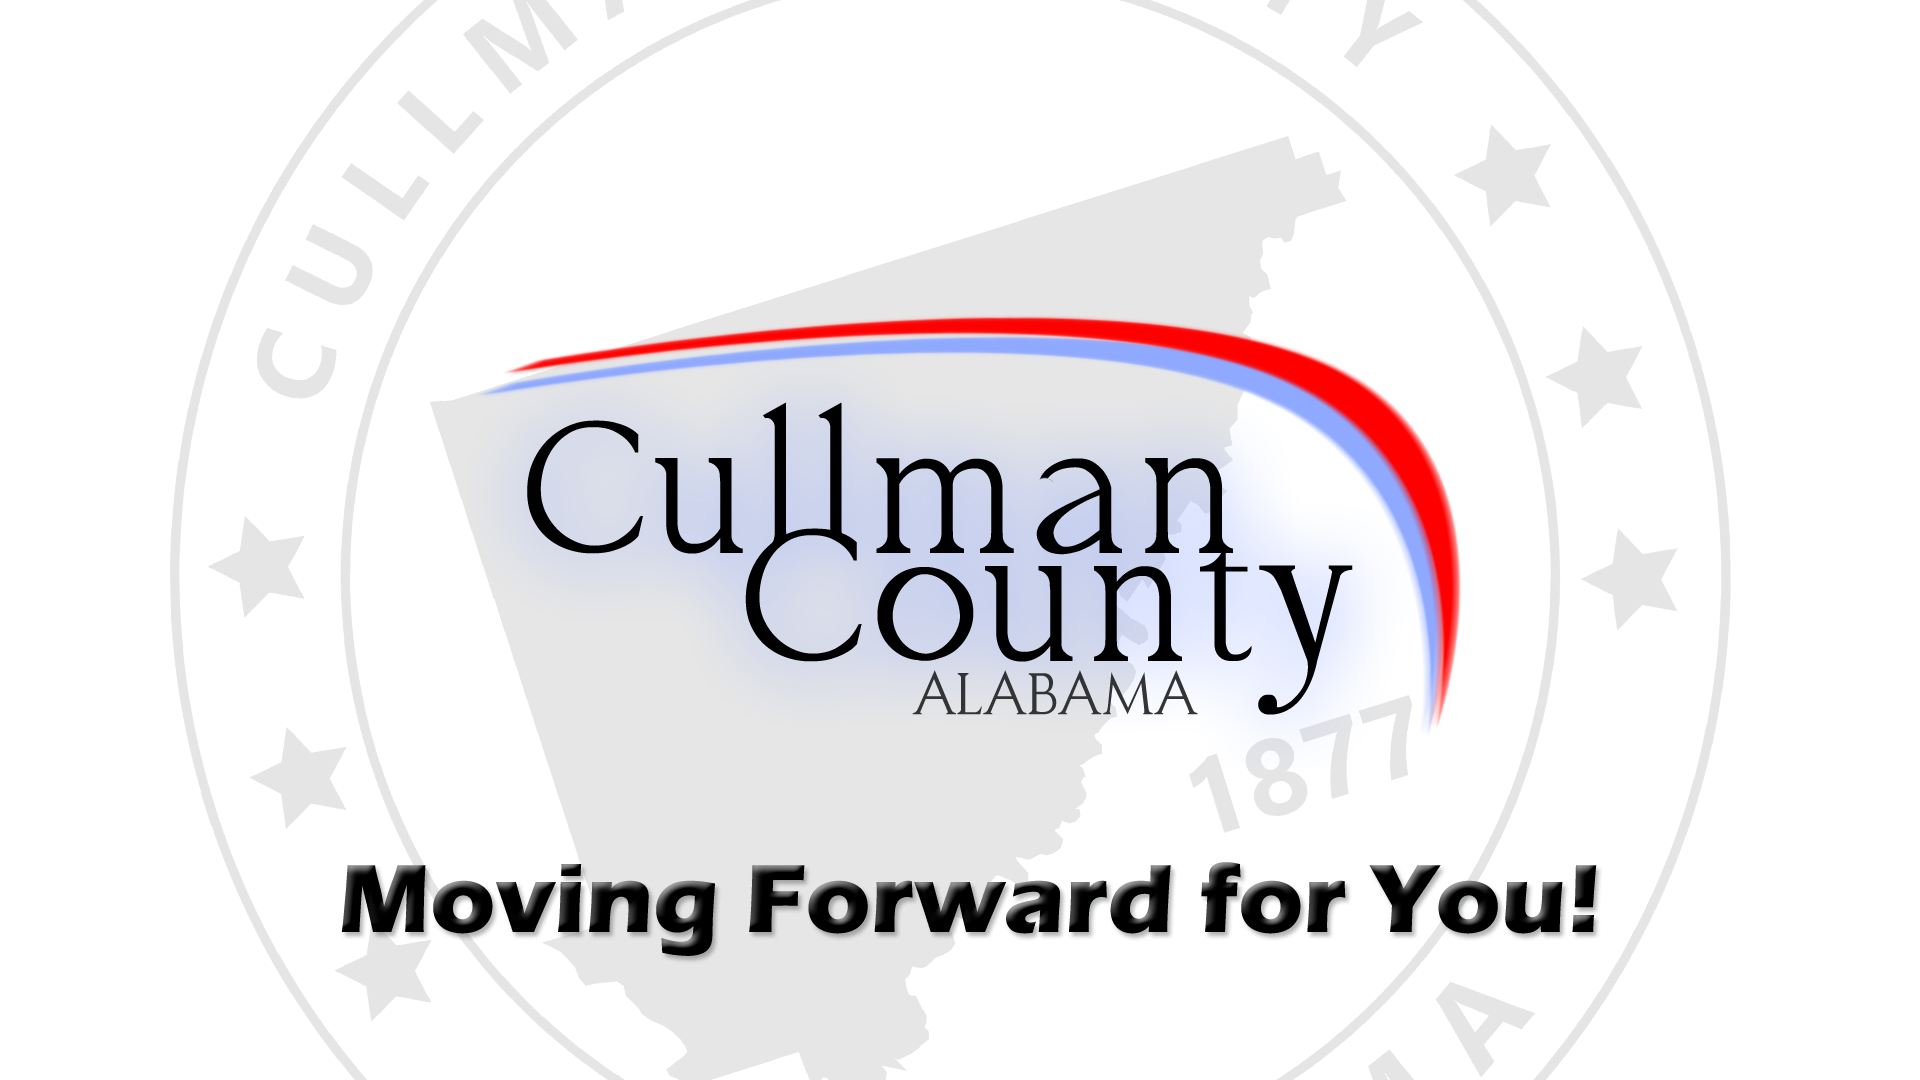 Cullman County Commission - Moving Forward For You!